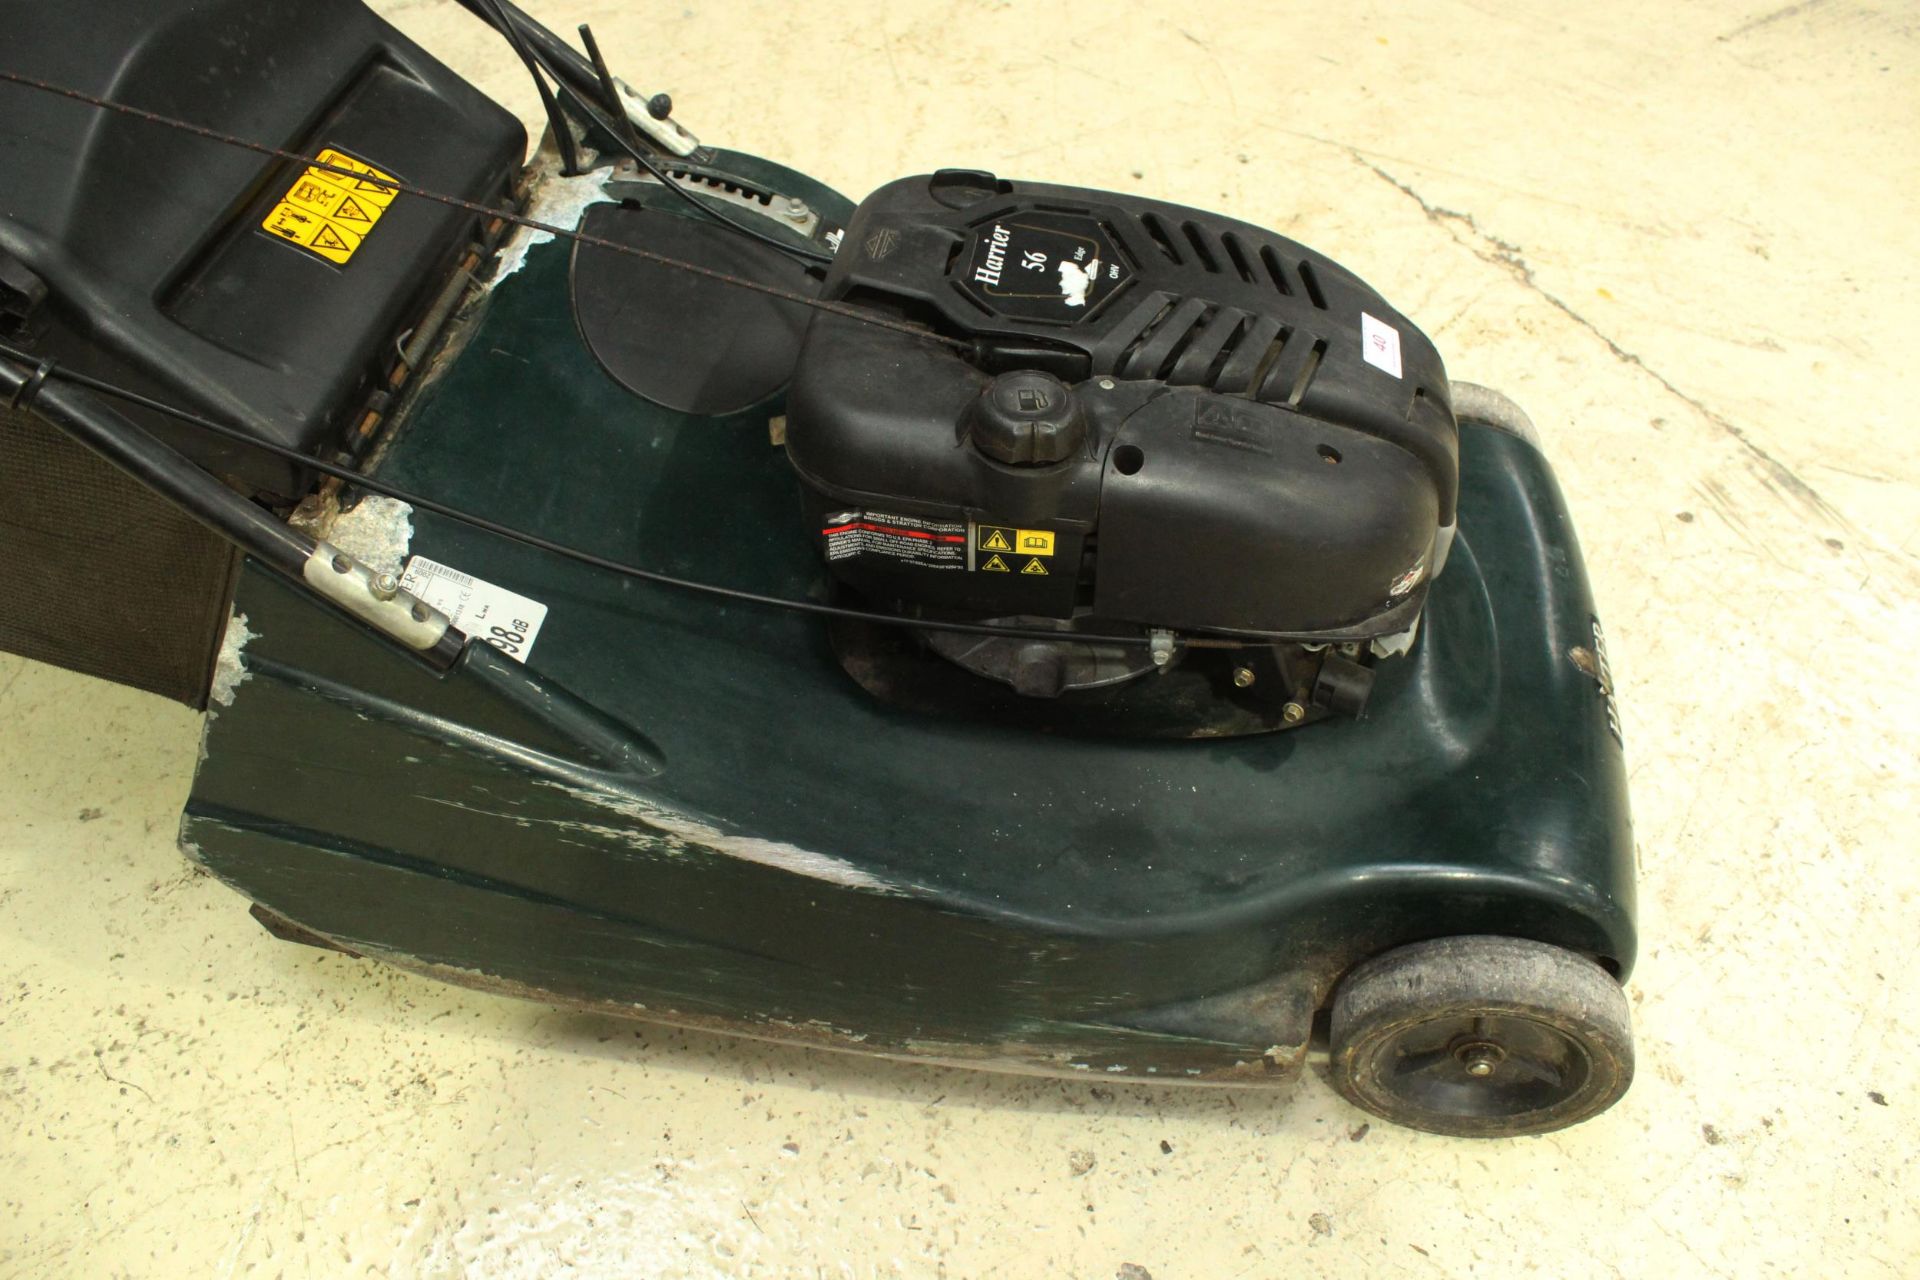 HAYTER HARRIER 56 22" ROLLER DRIVE LAWN MOWER WITH GRASS BOX IN WORKING ORDER NO VAT - Image 2 of 3